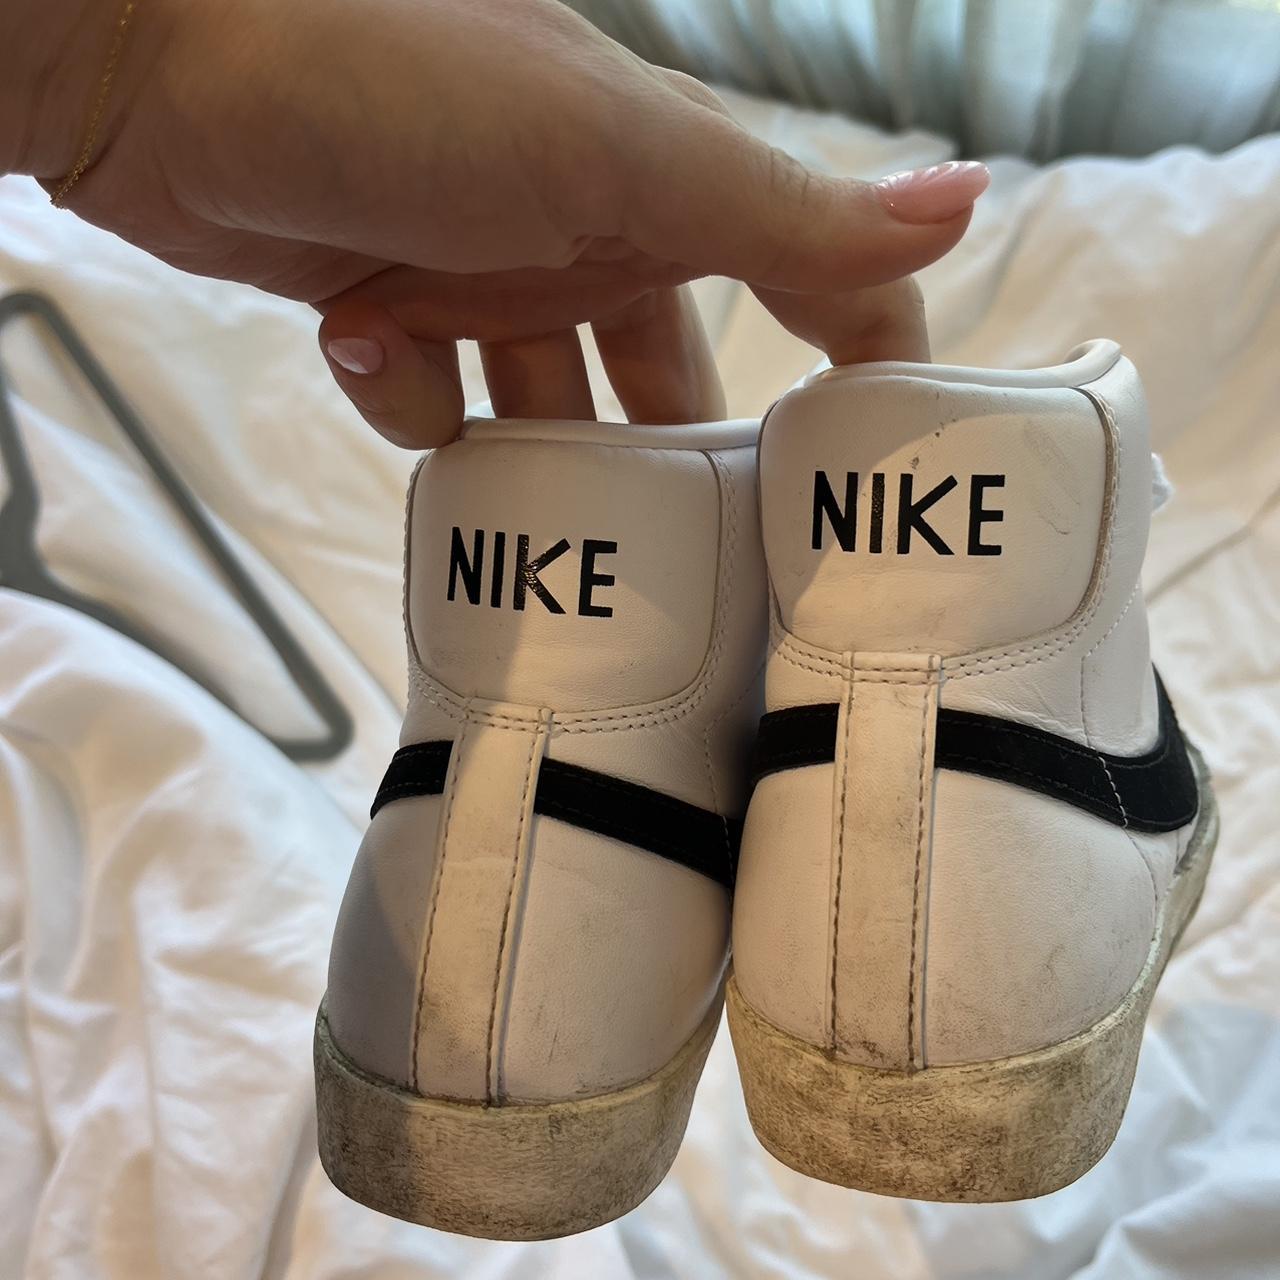 NIKE shoes Are fairly worn but also could be... - Depop